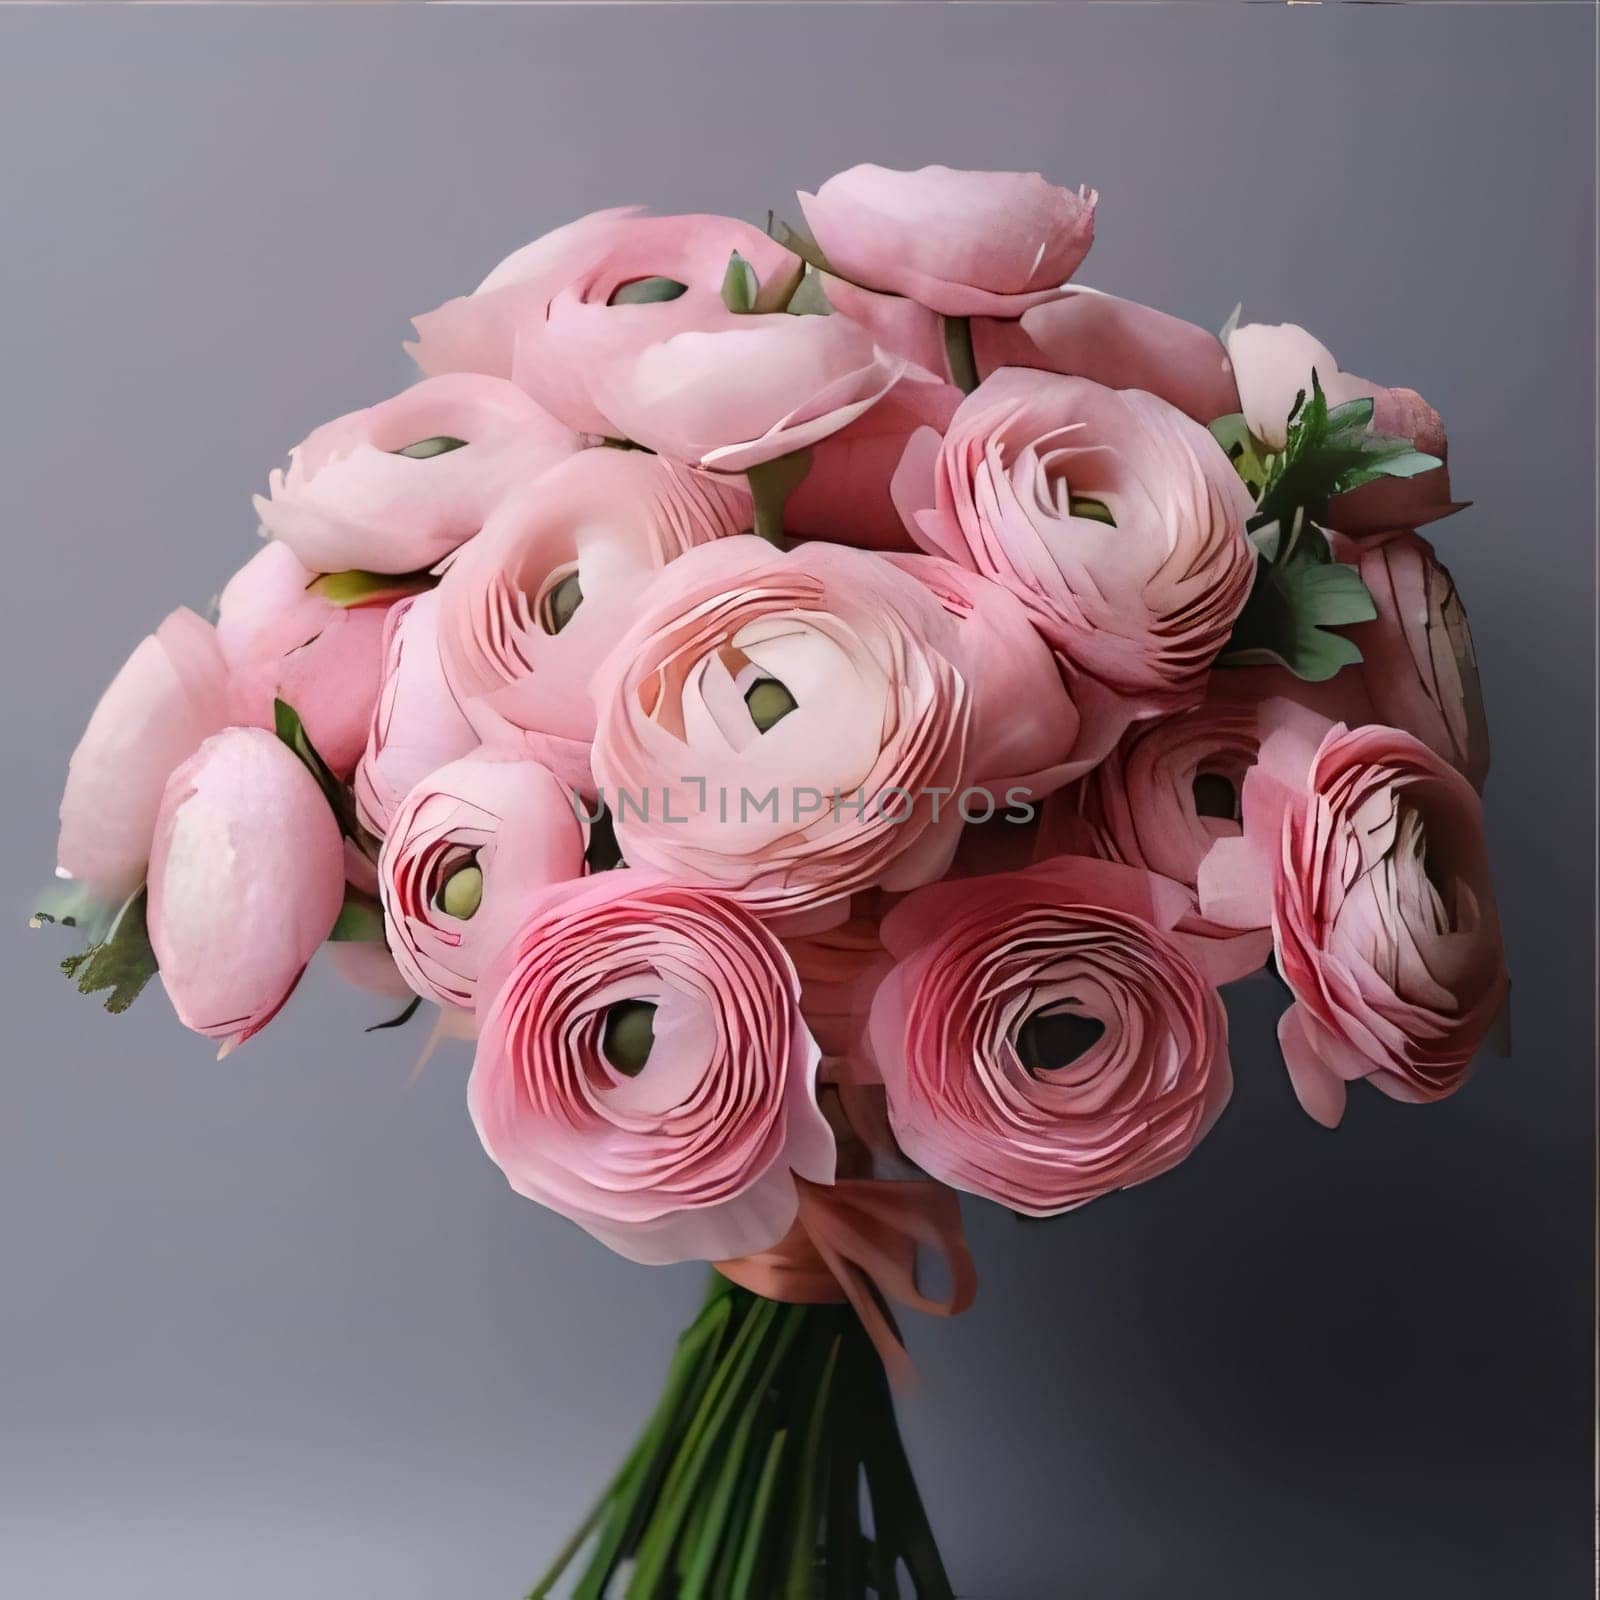 Pink bouquet of flowers decorated with a bow on a dark background. Flowering flowers, a symbol of spring, new life. A joyful time of nature waking up to life.